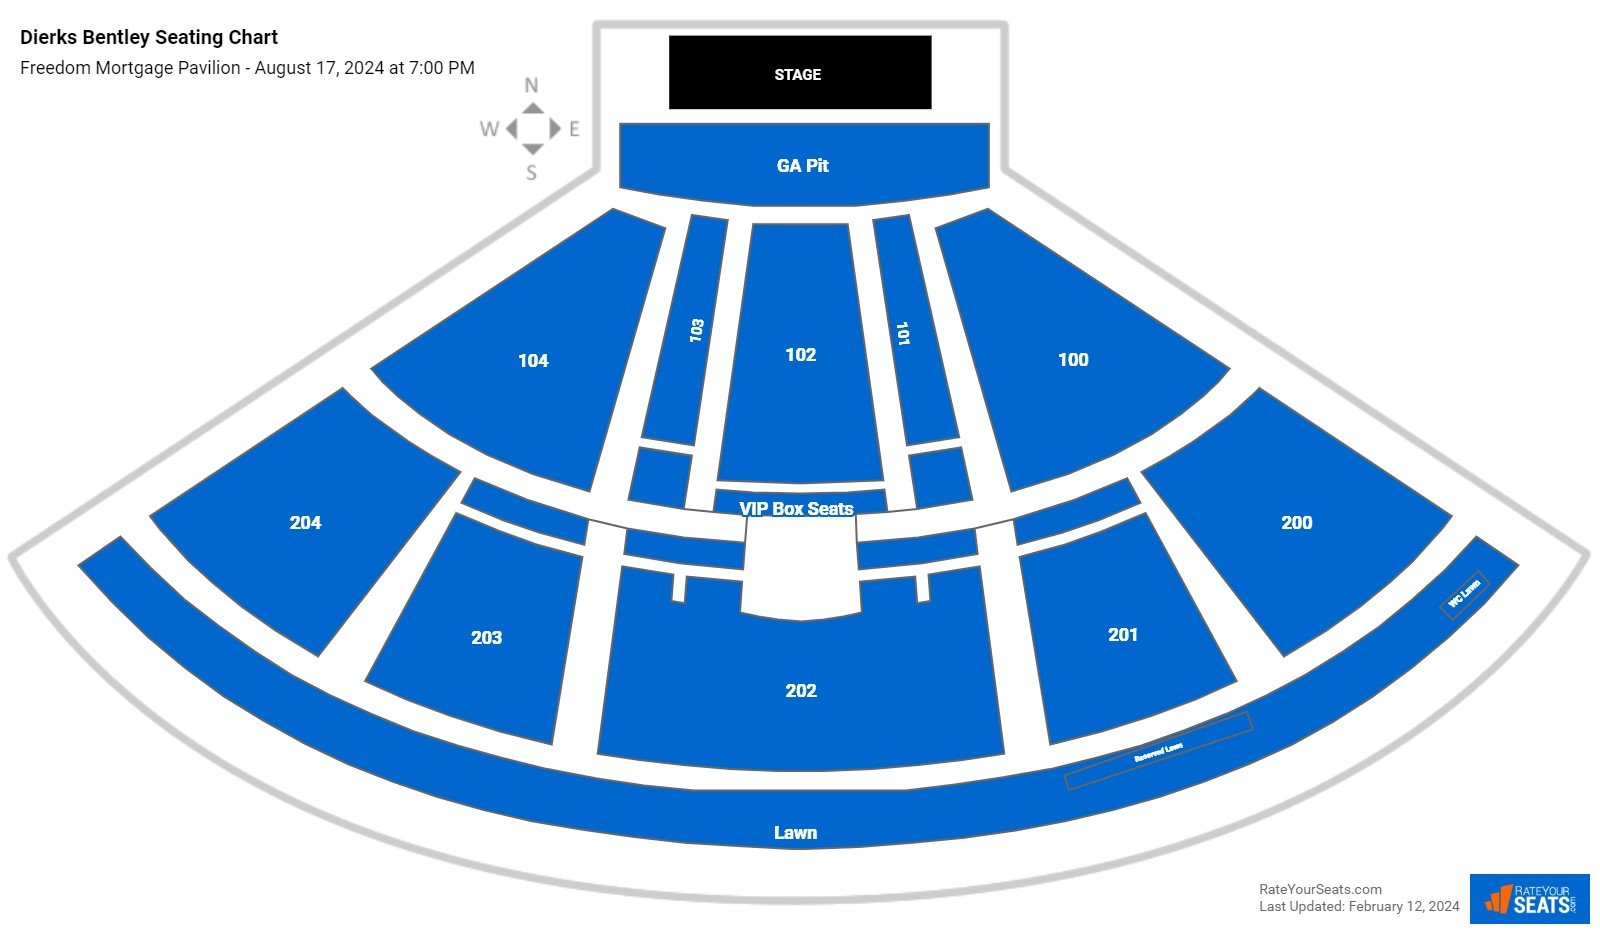 Dierks Bentley seating chart Freedom Mortgage Pavilion